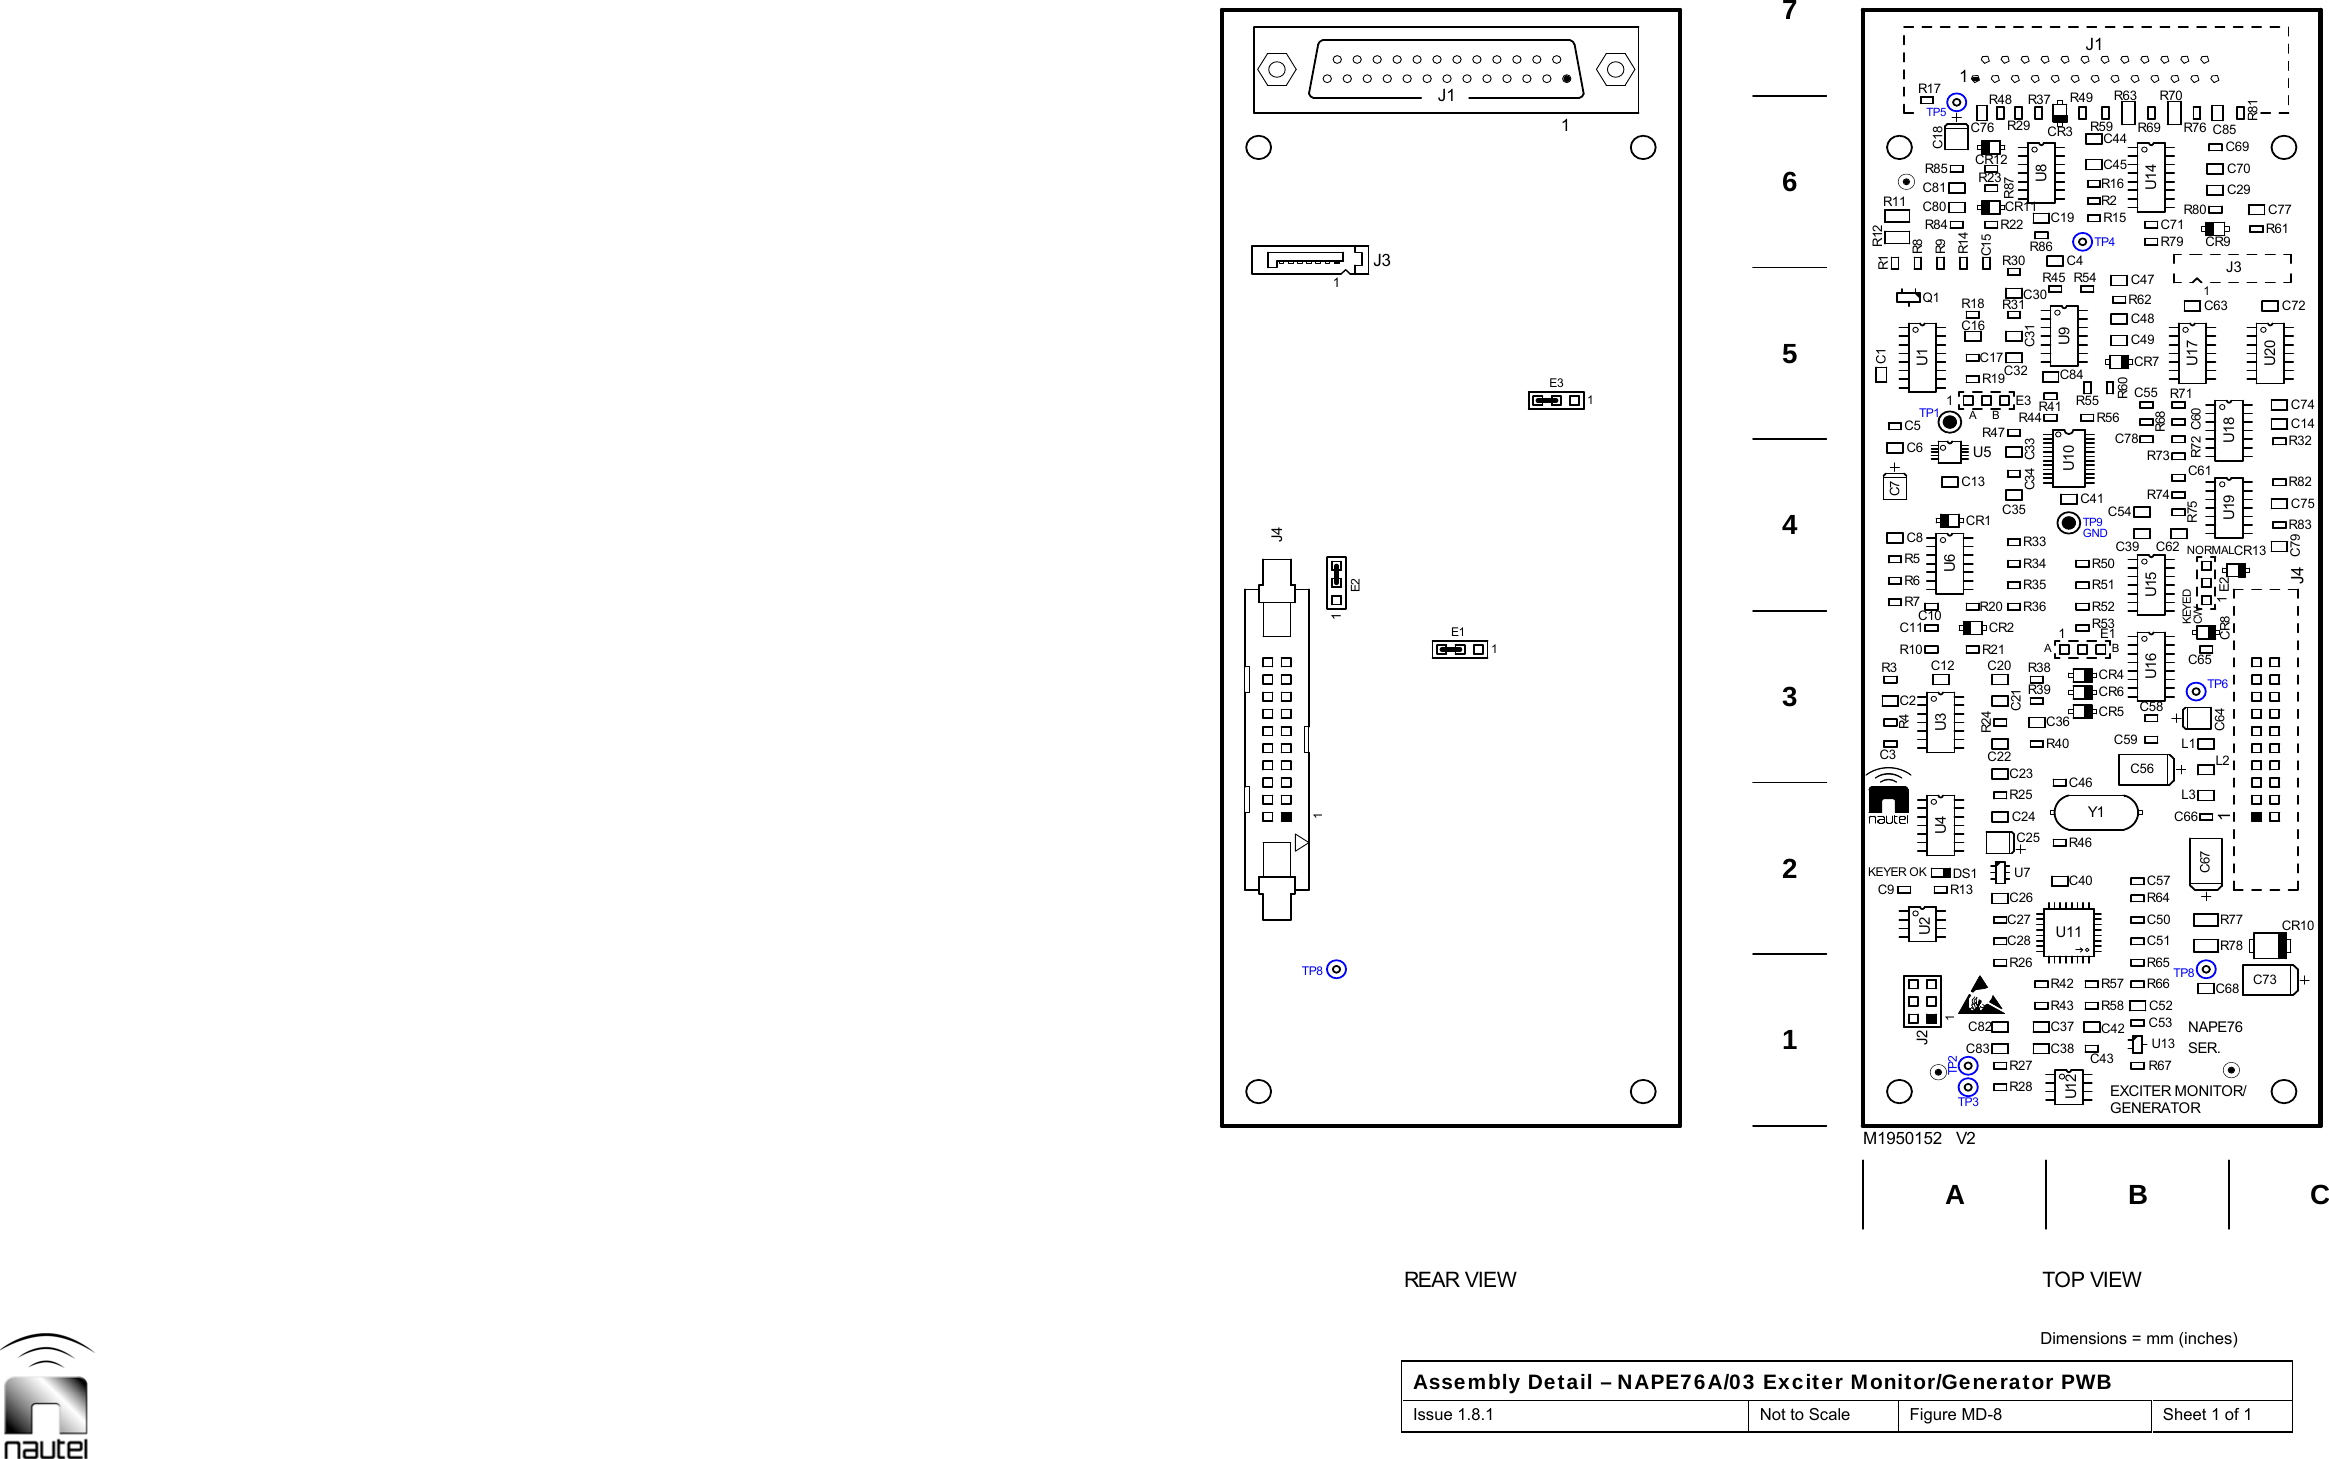  Dimensions = mm (inches) Assembly Detail – NAPE76A/03 Exciter Monitor/Generator PWB Issue 1.8.1  Not to Scale  Figure MD-8  Sheet 1 of 1  R8R14R60R29R49 R63R76R81R27TP2R28C82 C42C37R26R57R42C27DS1 U7 C40C24C23C21R24CR5C36R21R38R52R36R20R53R50R34C41CR1 C35C33R56R41R44C17C30R18 R31TP4R86C4R87C81 R16R2C80C44CR12TP5TP8R77C66L2C64C65C79CR13R74 C75R75R32R73R71 C74C63 C72C29R80 C77C69E211E31C1 R1C43C83 C38R58R43C28TP3U12R13 C26C25 R46R25C22R40U4C46R39 CR6R51R35R33C20C12CR2CR4TP9U6C13C34R55R19 C84C16U5R47C32U10C31R54R45R22R84R23R85R9C15C45R30C19CR11C18U8R78C68 C73L3L1C67TP6C62CR8R83R82R72C61C60C14U18U17U20CR9R61C701J3U3U11C76R37R59R48CR3U9CR10U19R69R70C85R67C53R65R66U2C50C57C2R4C58R3R7C10R5C54C6C55C49CR7R62R79R17U13C52C51J21C9C3R64C59C56Y1R101E1R6C39C11U16 U15C8C5C78TP1R68C48U1R12C47R15 C71R11U14C7Q11J41J1251E311167A11BE2J434J3J1E1CREAR VIEW TOP VIEWM1950152   V2TP8GNDABKEYEDCWABNAPE76NORMALSER.KEYER OKGENERATOREXCITER MONITOR/